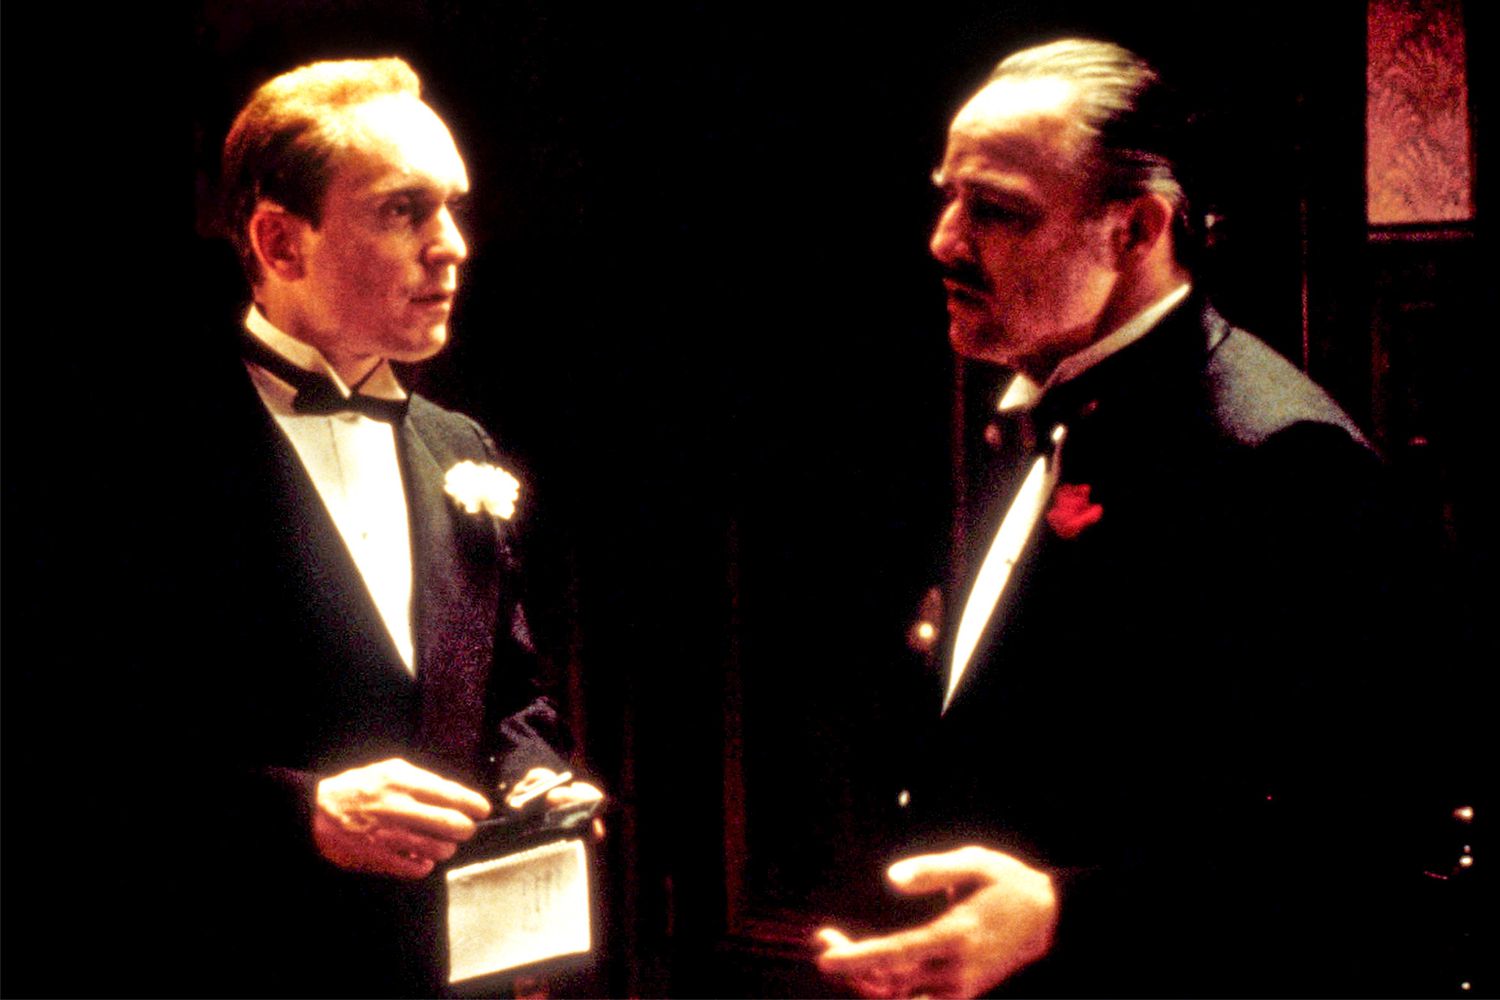 How Robert Duvall Knew 'The Godfather' Would Change Movies Forever: Celebrating 50 Years of Cinematic Genius